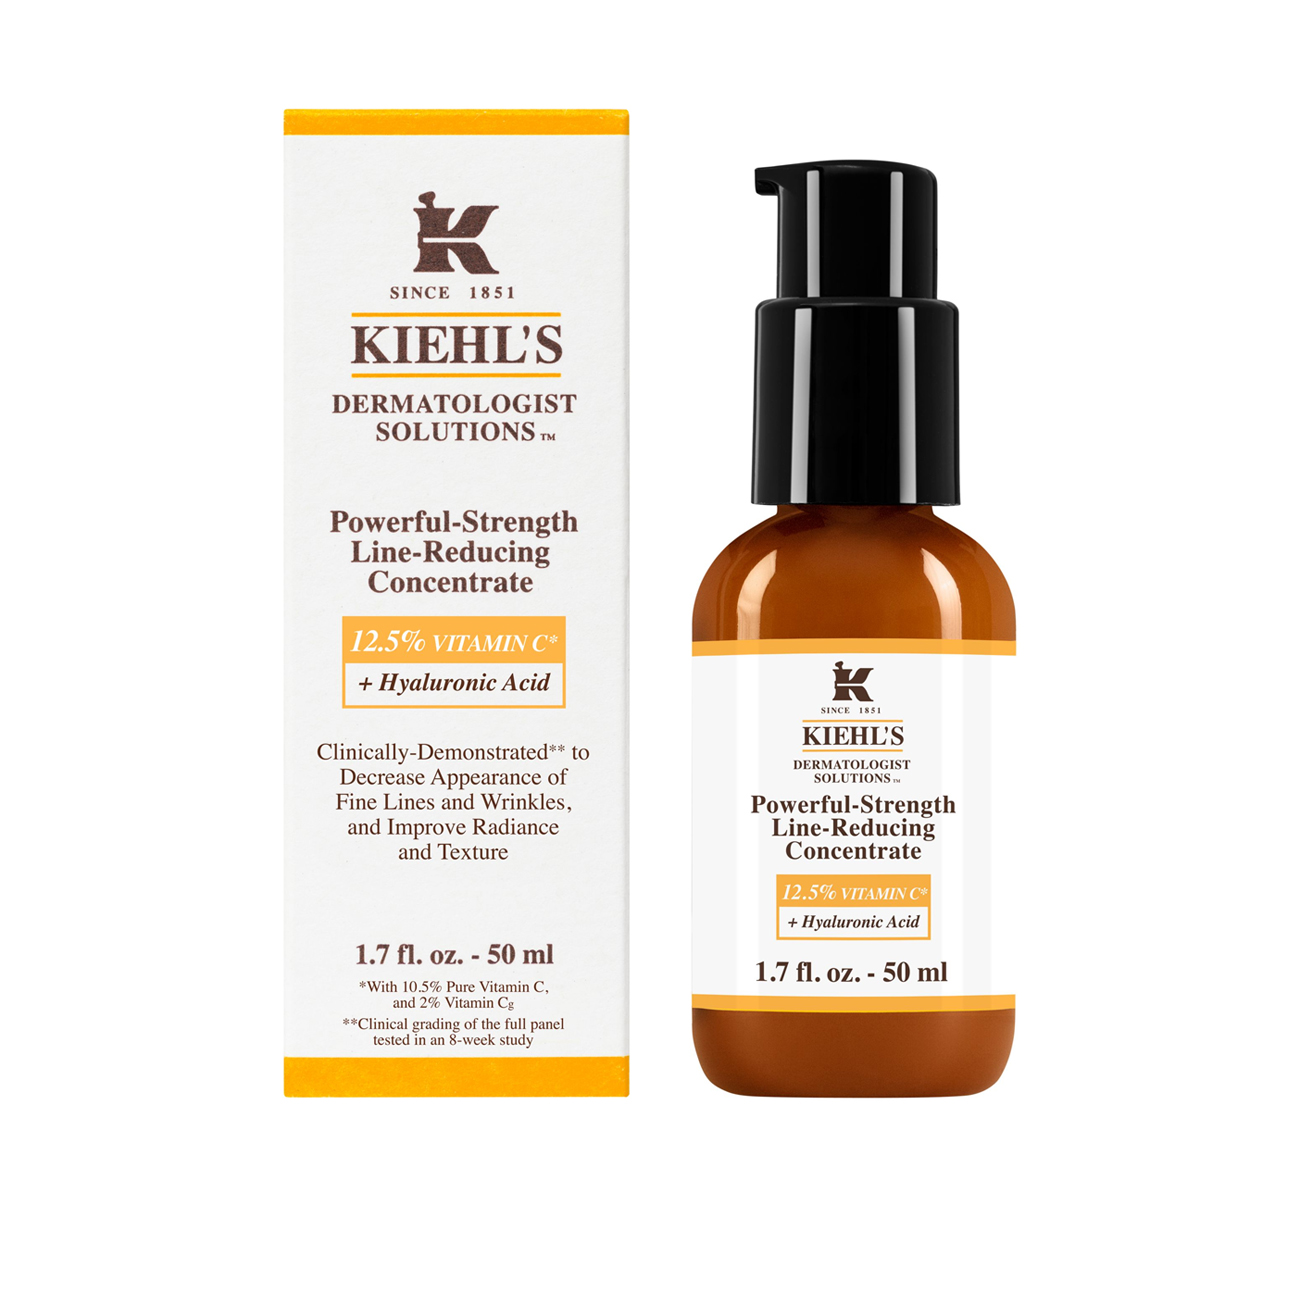 Kiehl’s Powerful Strength Line-Reducing Concentrate.